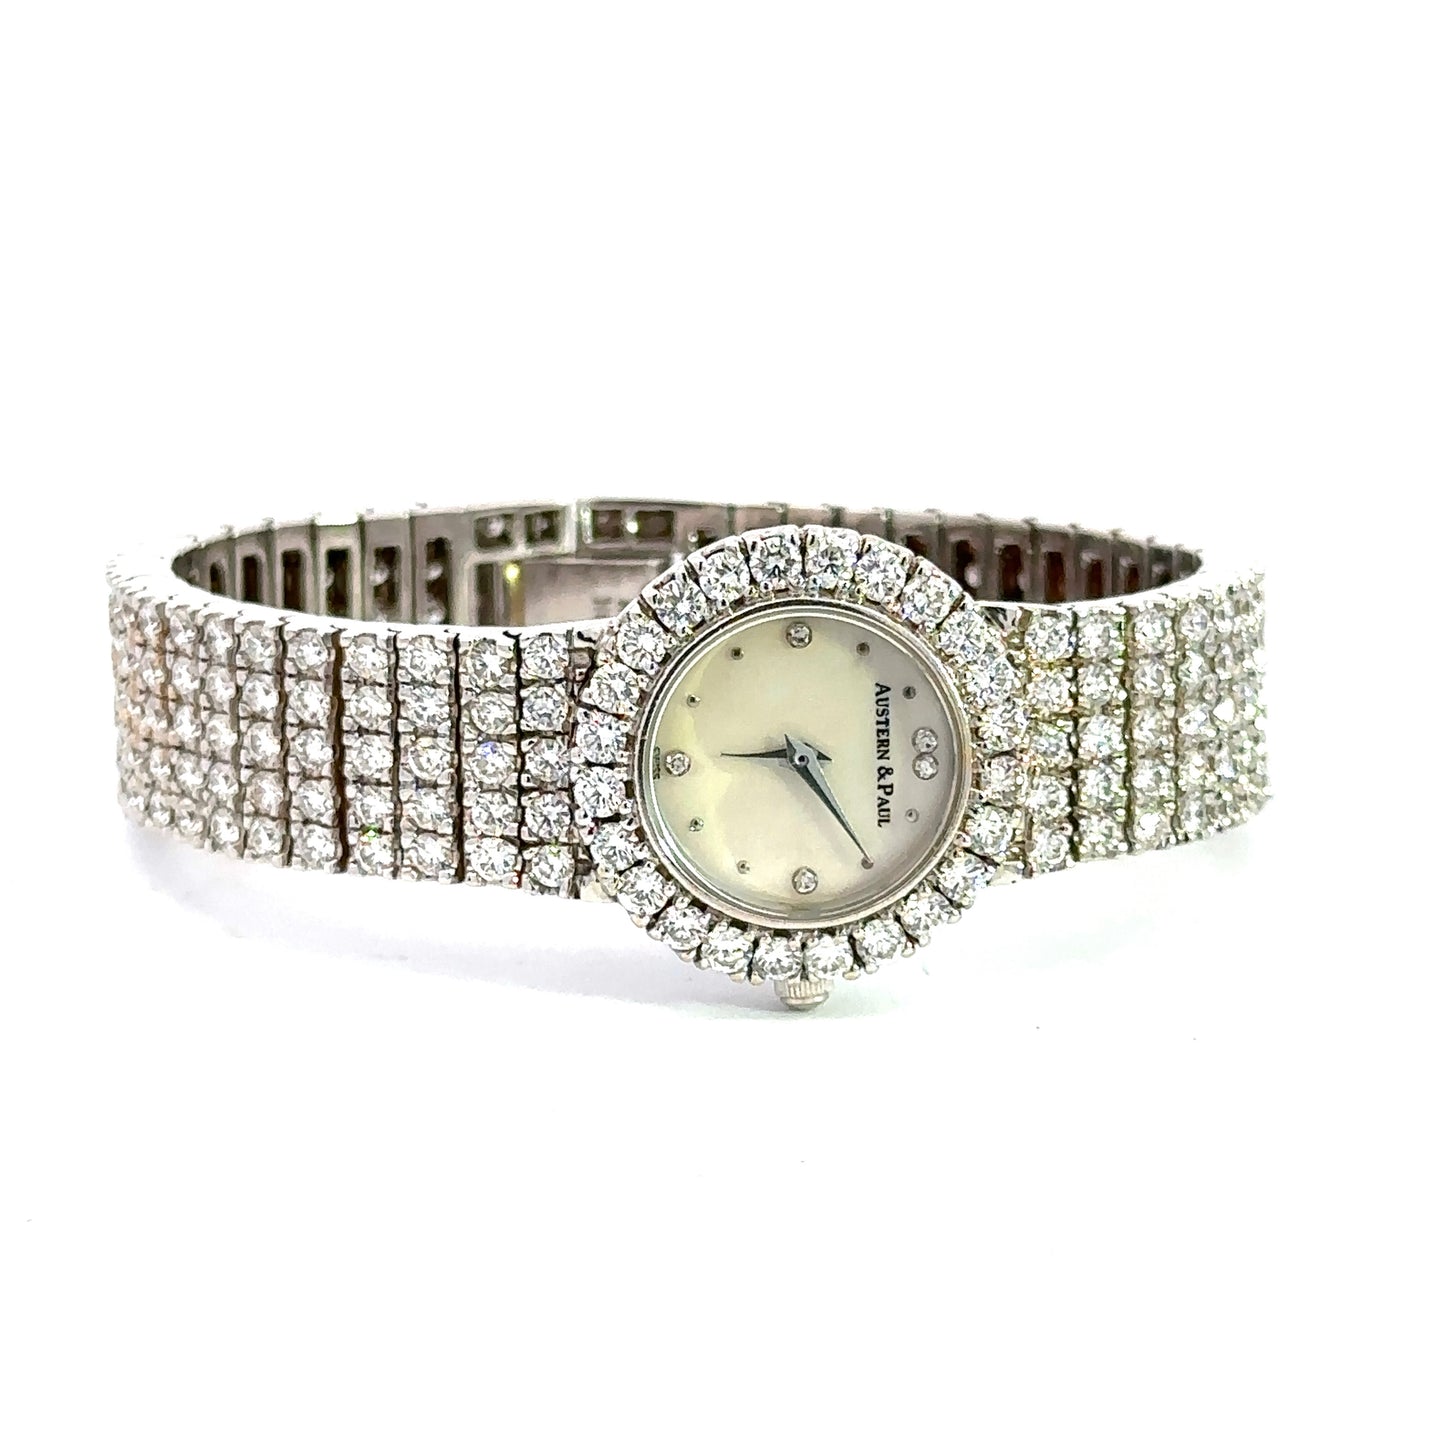 Front of watch laid on it's side with diamonds on the bezel and band